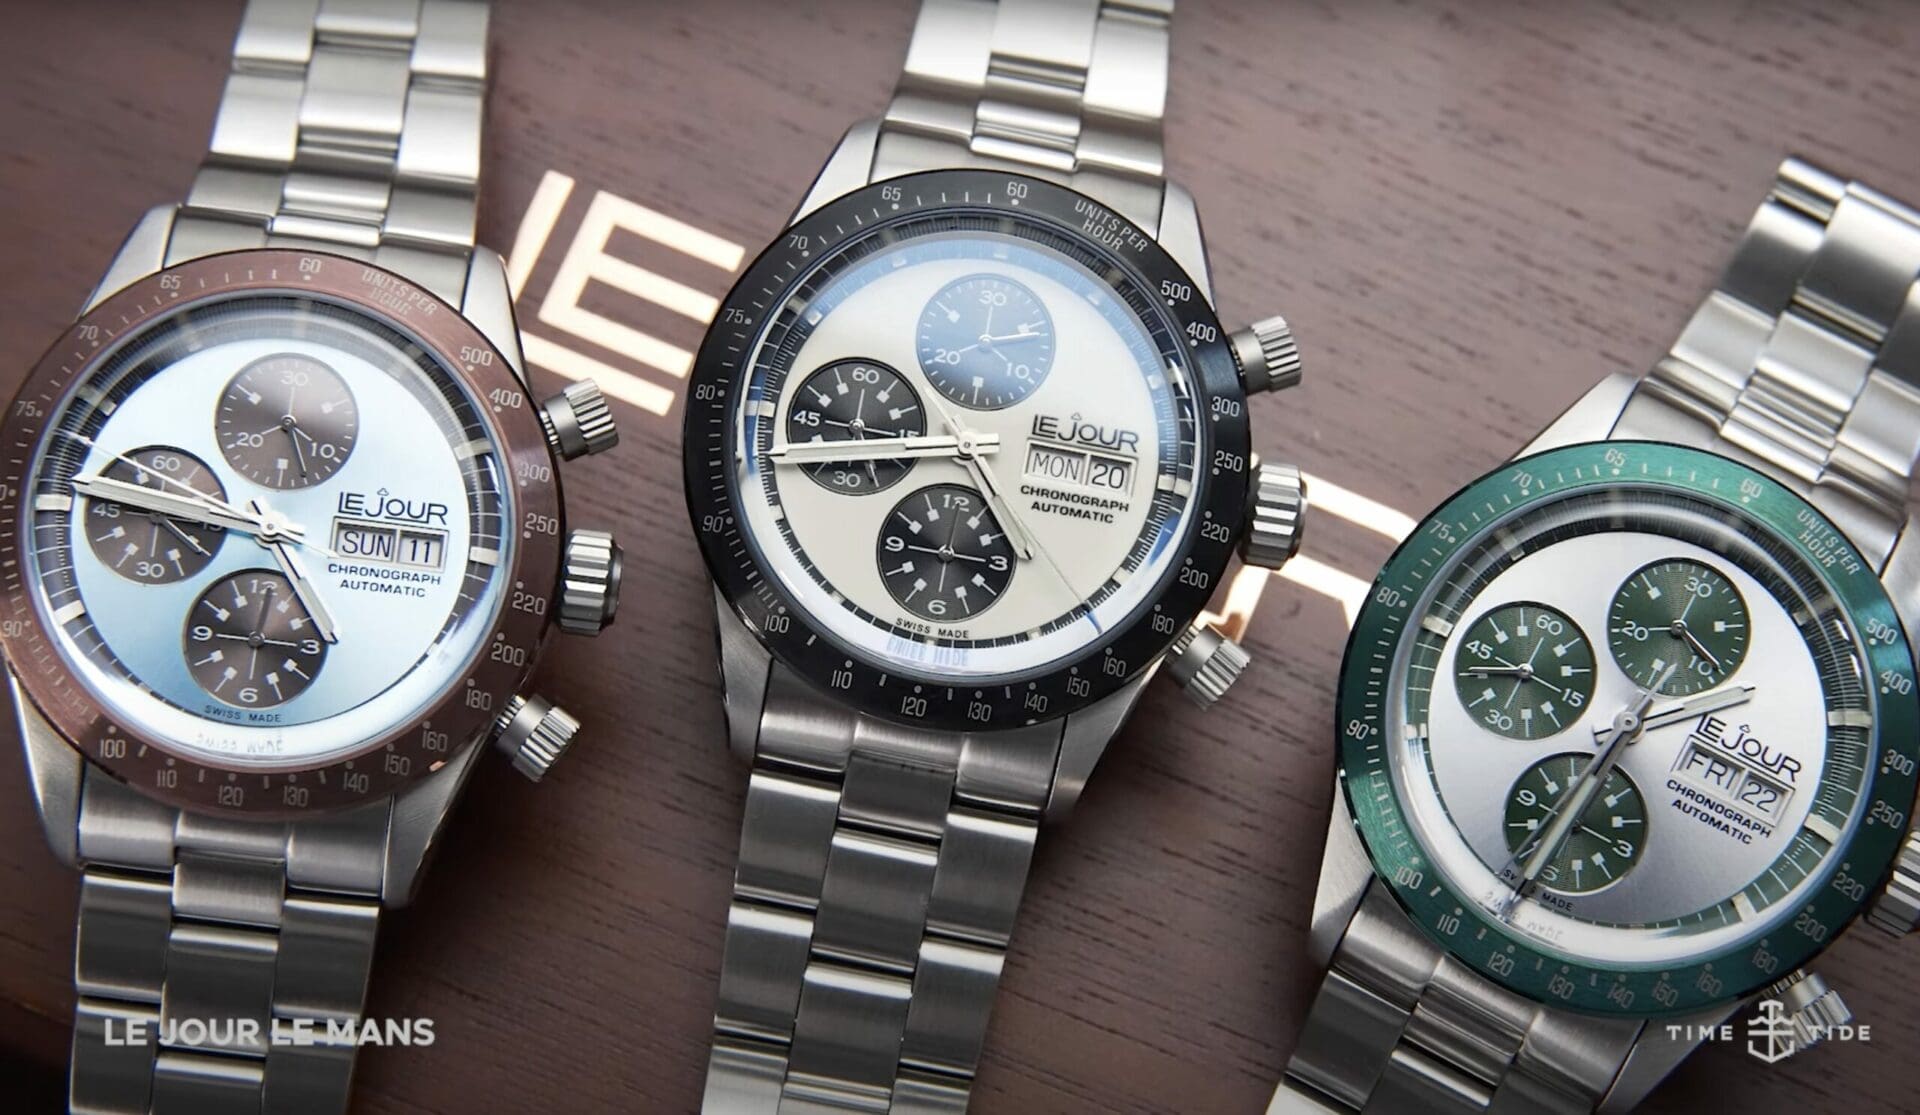 VIDEO: The Le Jour Le Mans Chronograph collection is hotwired with 1960s racing vibes